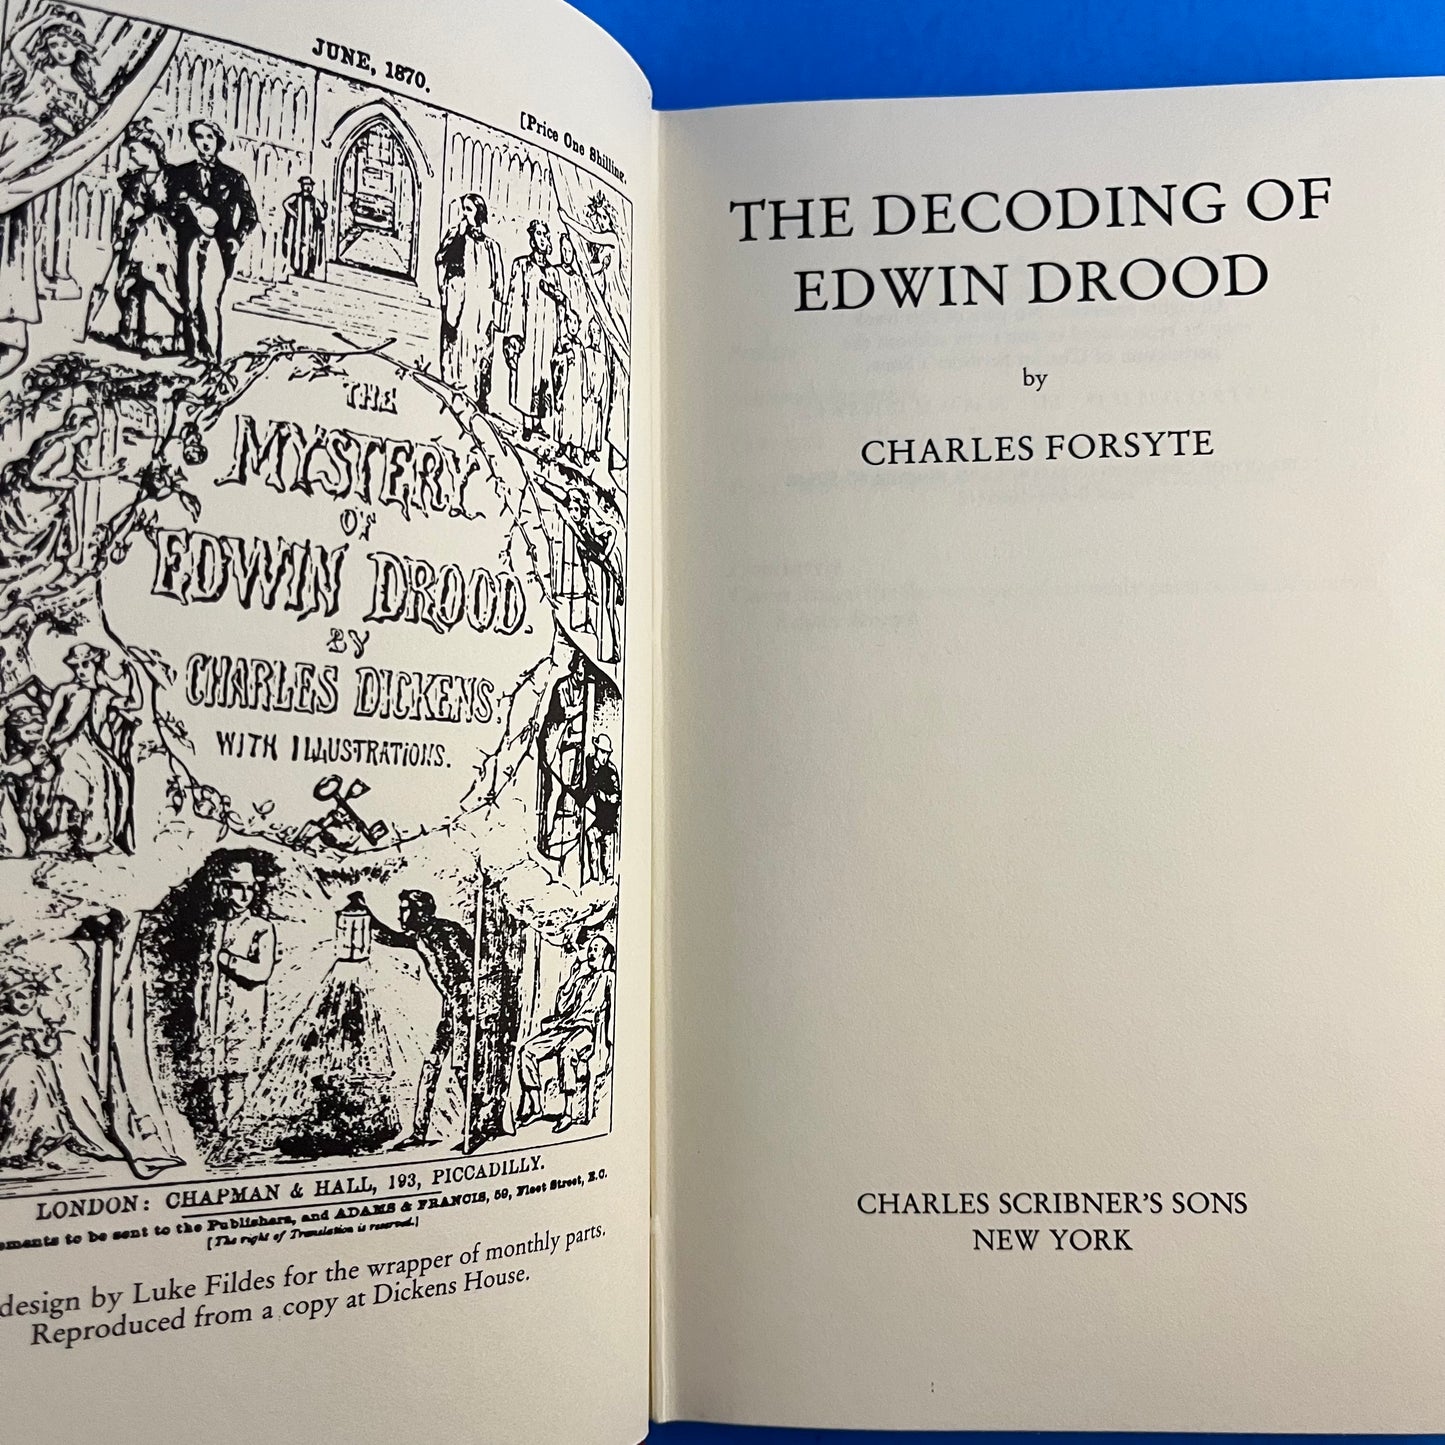 The Decoding of Edwin Drood